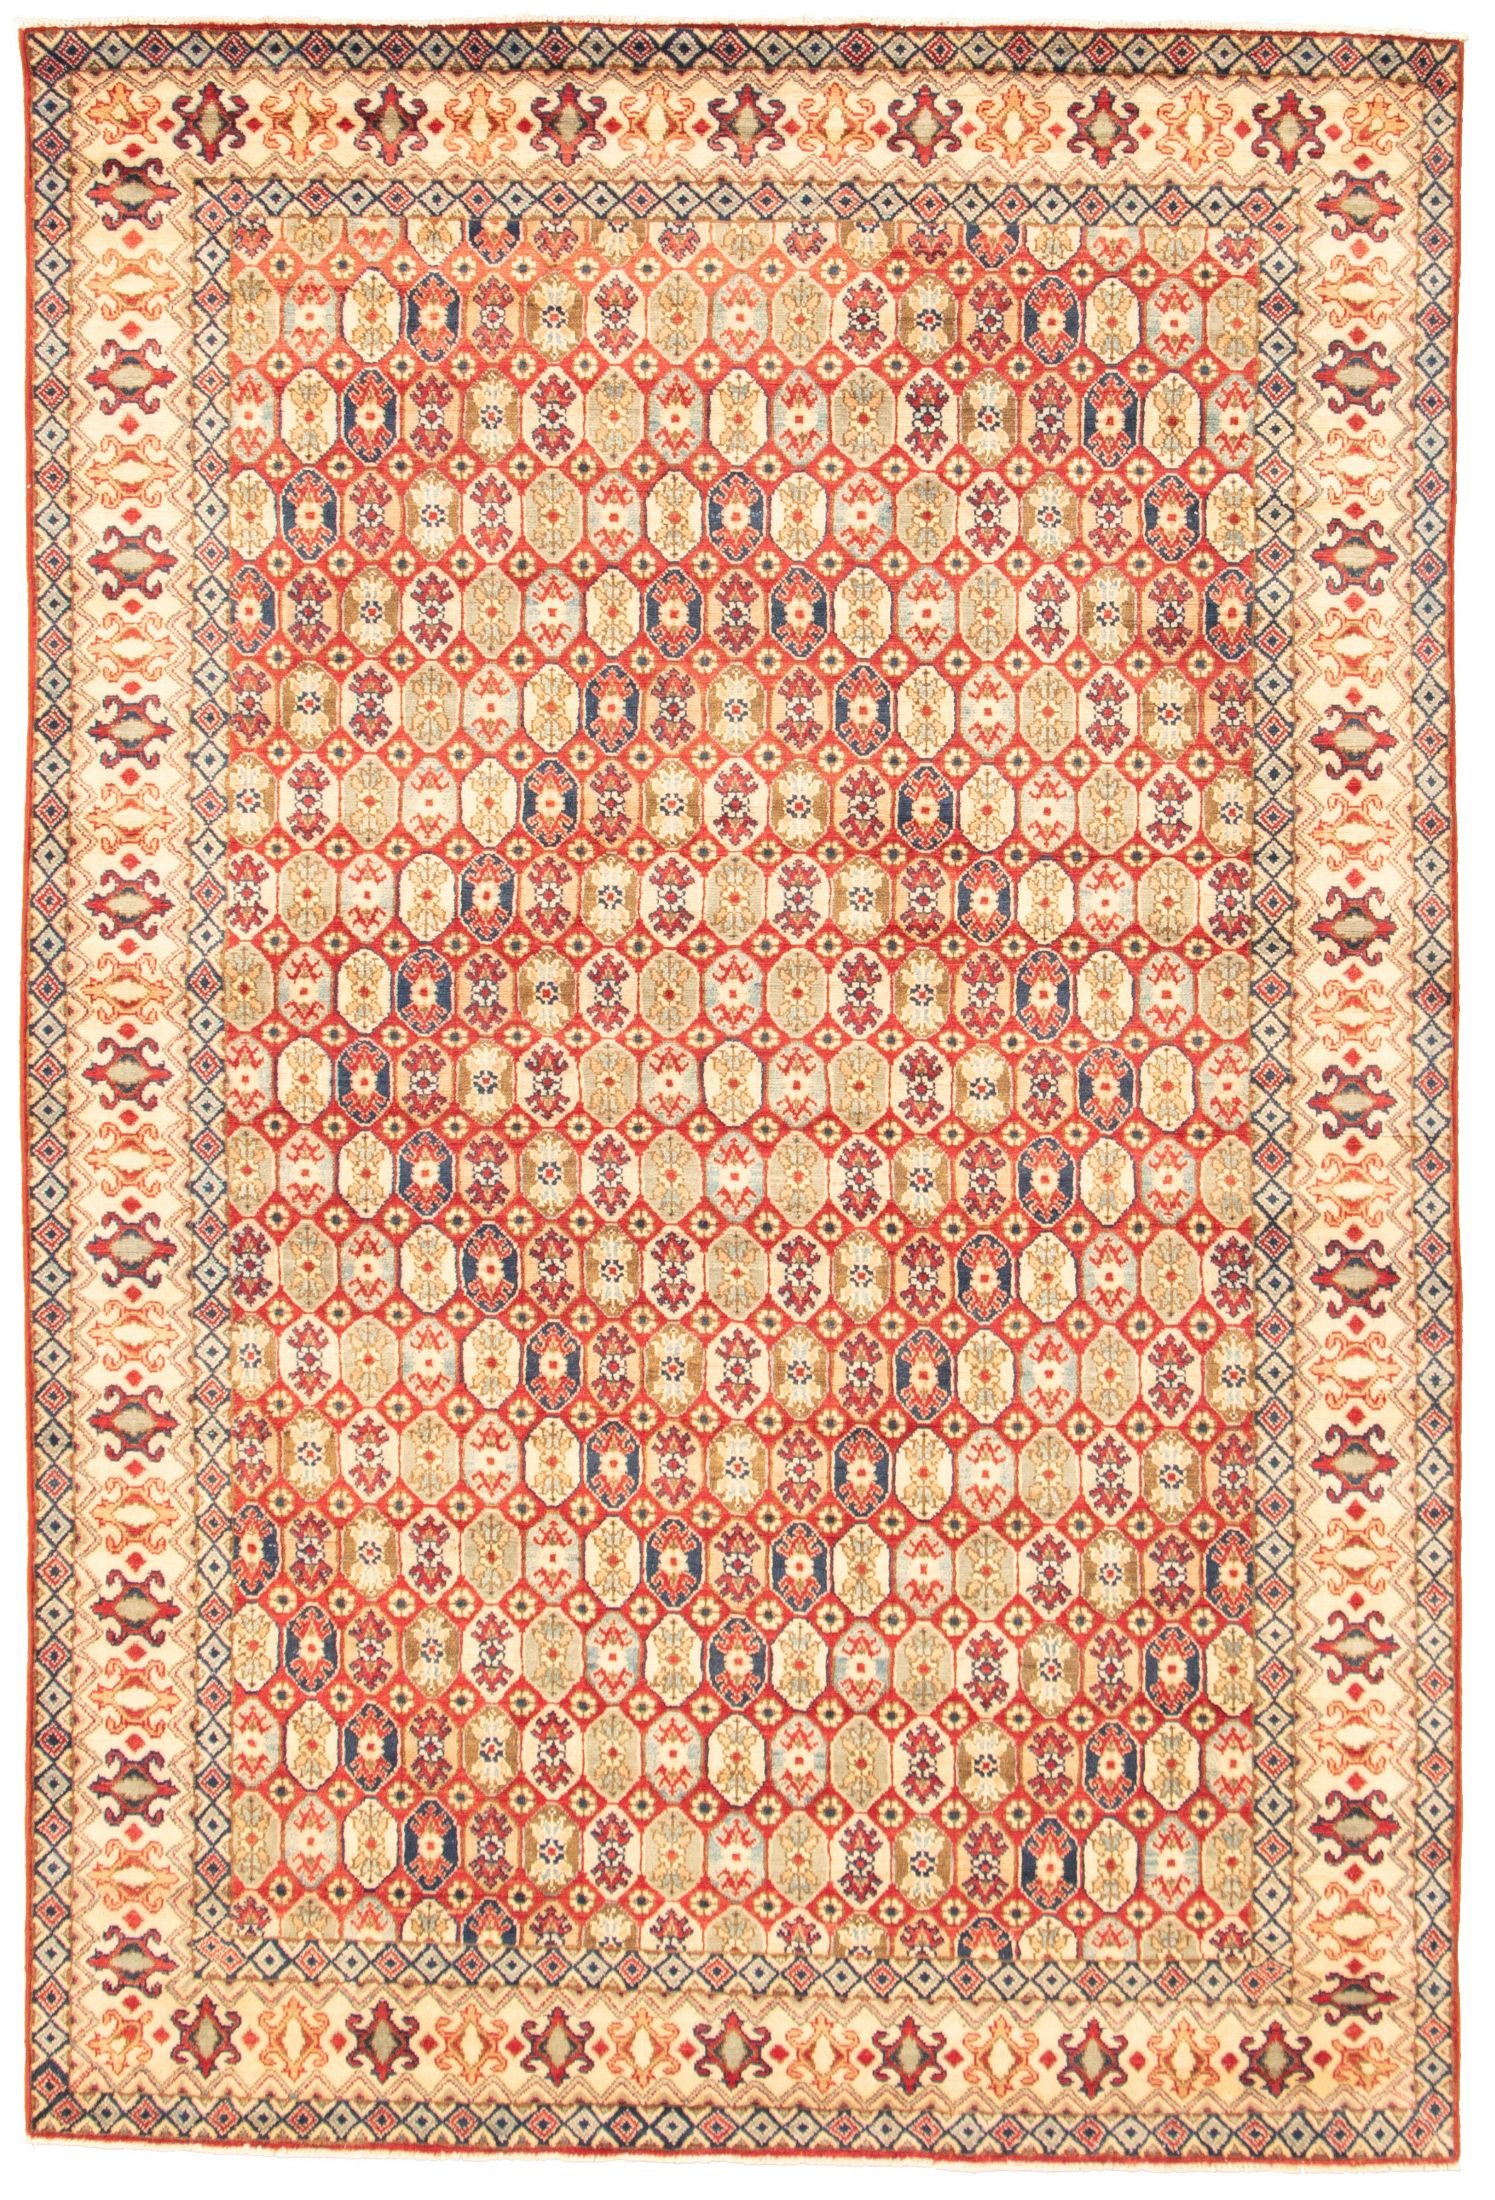 Hand-knotted Finest Gazni Red  Rug 6'4" x 9'7" Size: 6'4" x 9'7"  